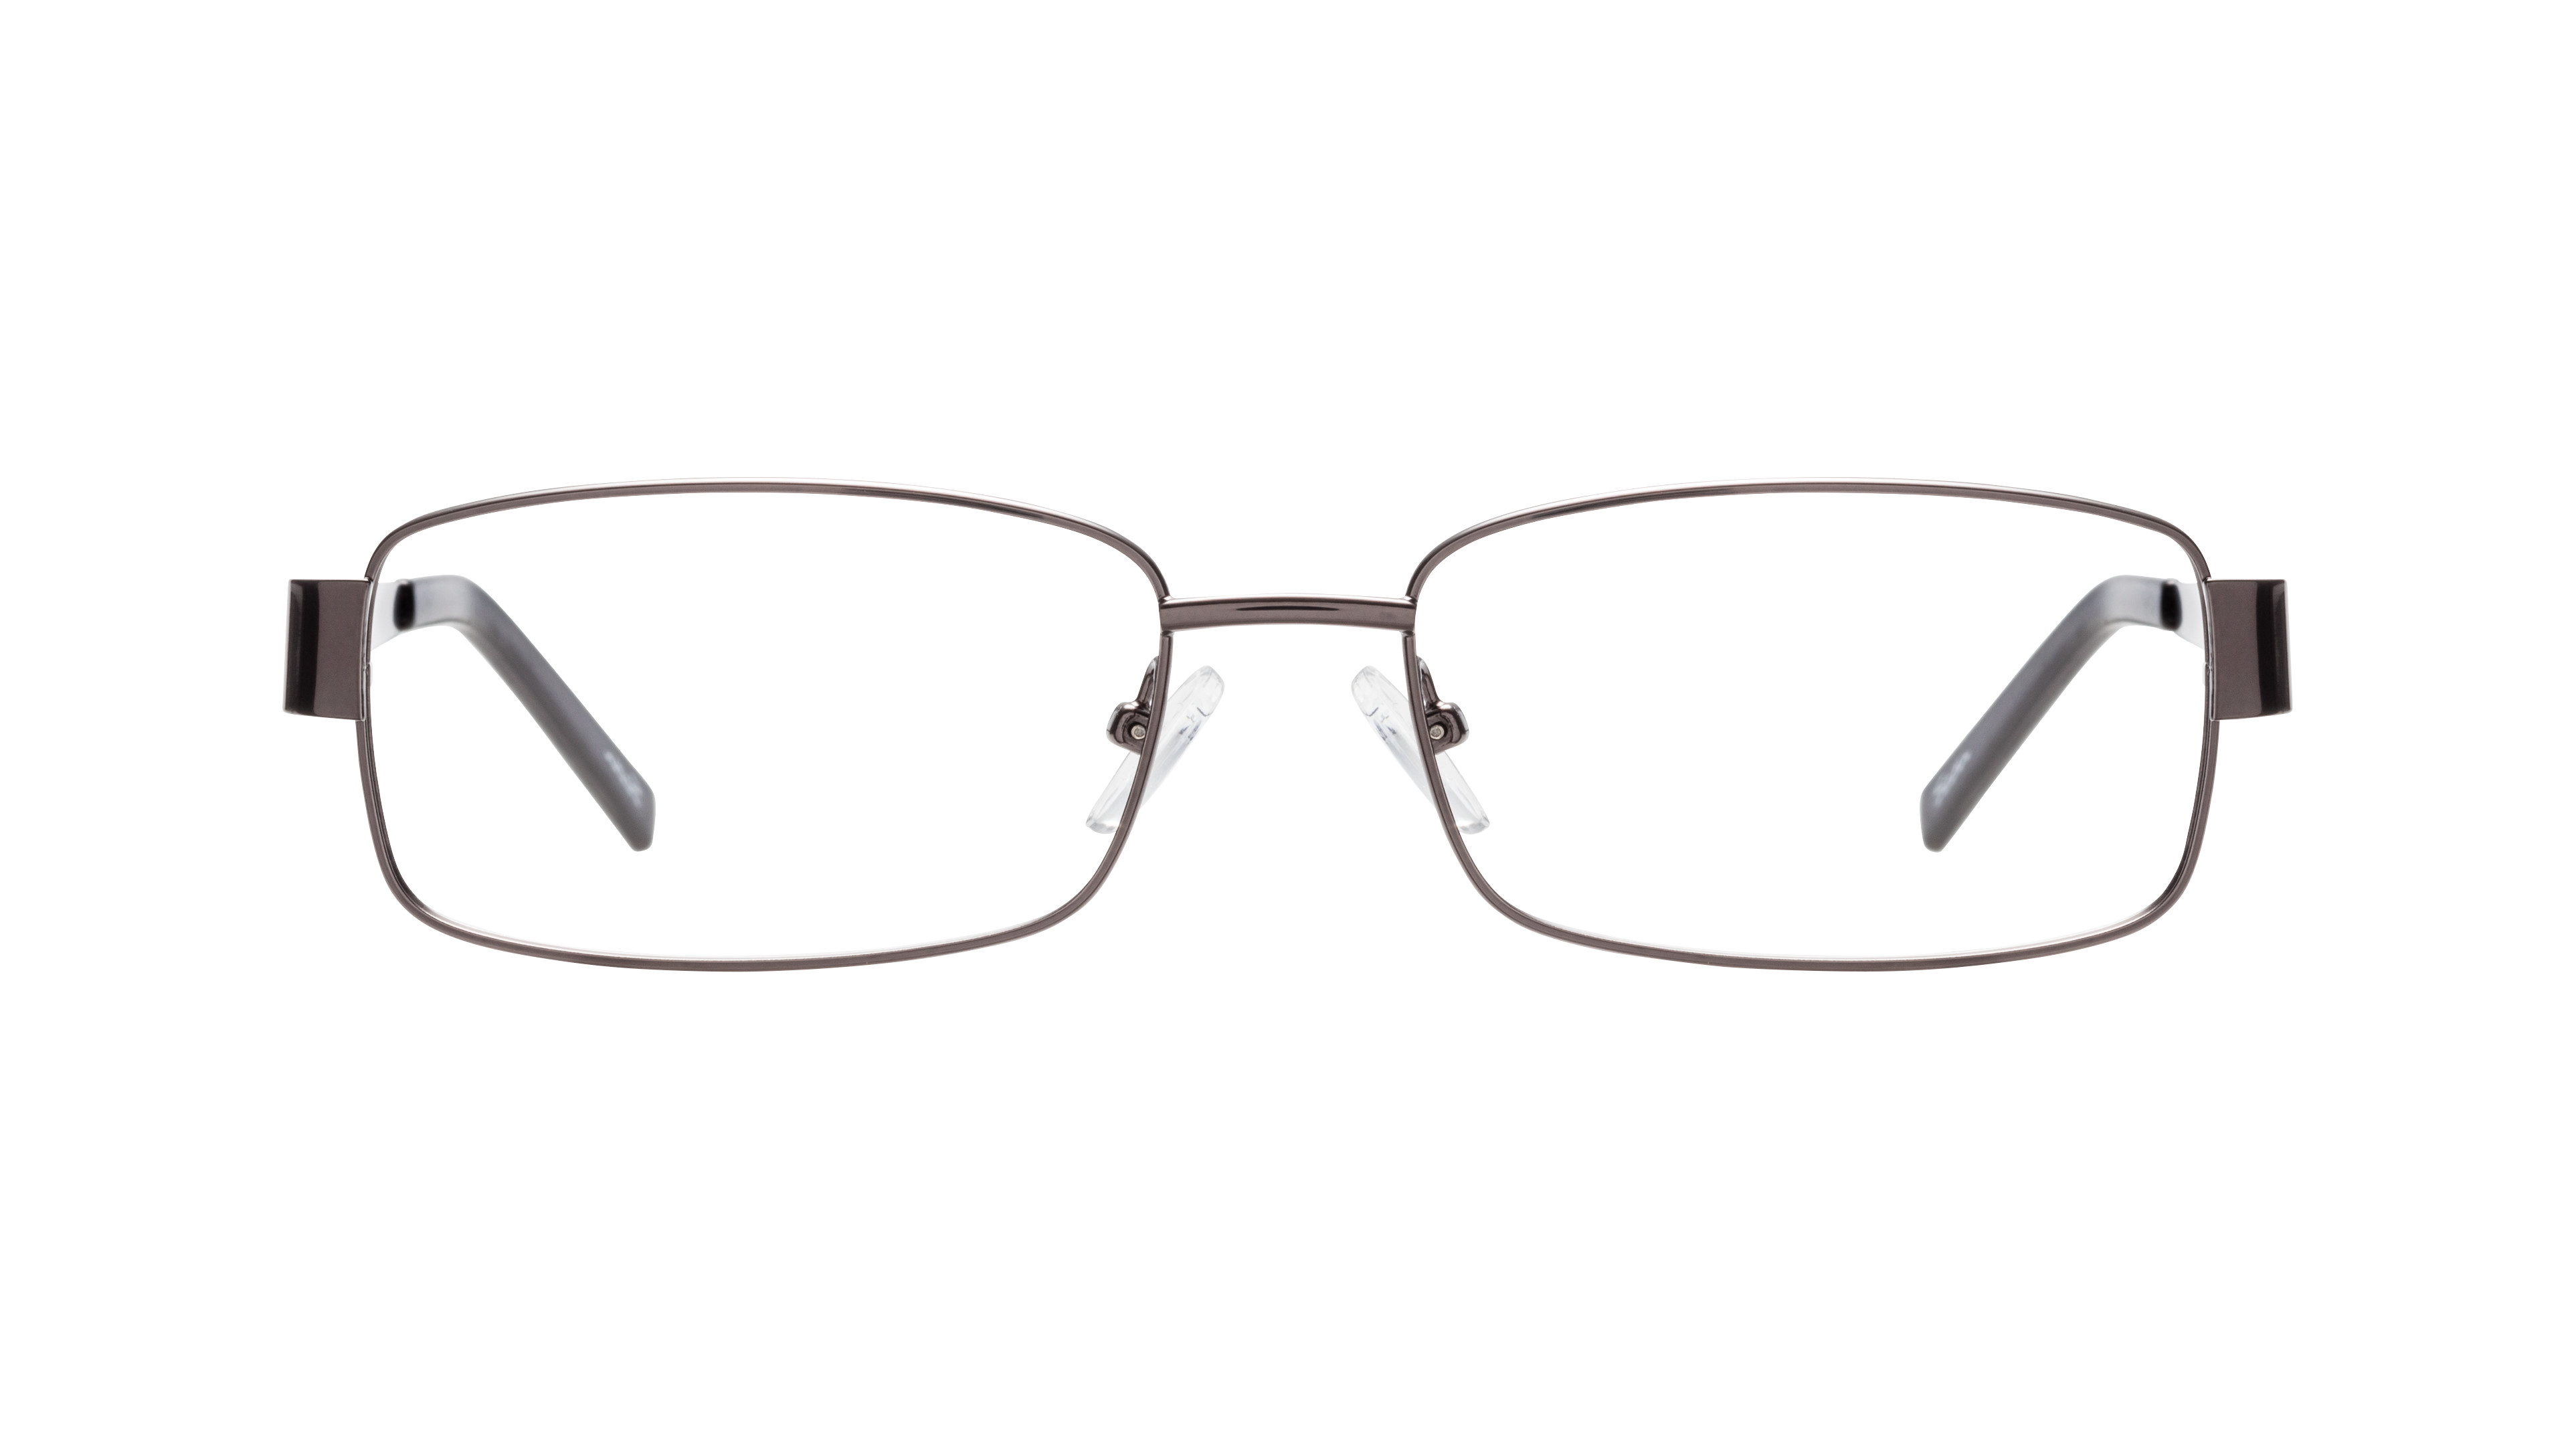 [products.image.front] Seen SNAM13 GG Brille